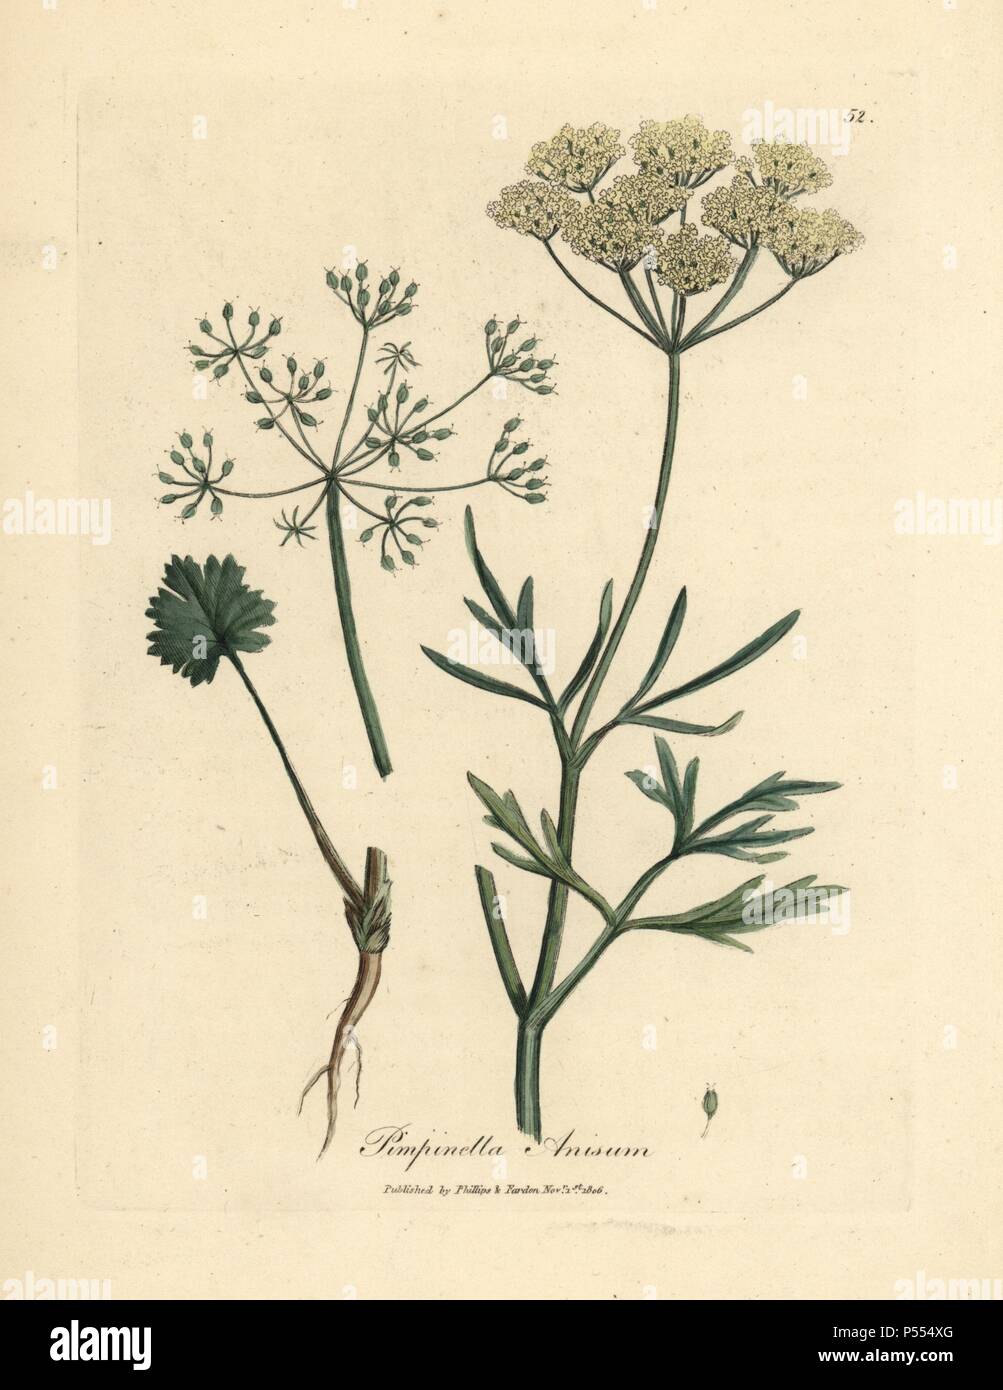 White flowered anise, Pimpinella anisum. Handcolored copperplate engraving from a botanical illustration by James Sowerby from William Woodville and Sir William Jackson Hooker's 'Medical Botany' 1832. The tireless Sowerby (1757-1822) drew over 2,500 plants for Smith's mammoth 'English Botany' (1790-1814) and 440 mushrooms for 'Coloured Figures of English Fungi ' (1797) among many other works. Stock Photo